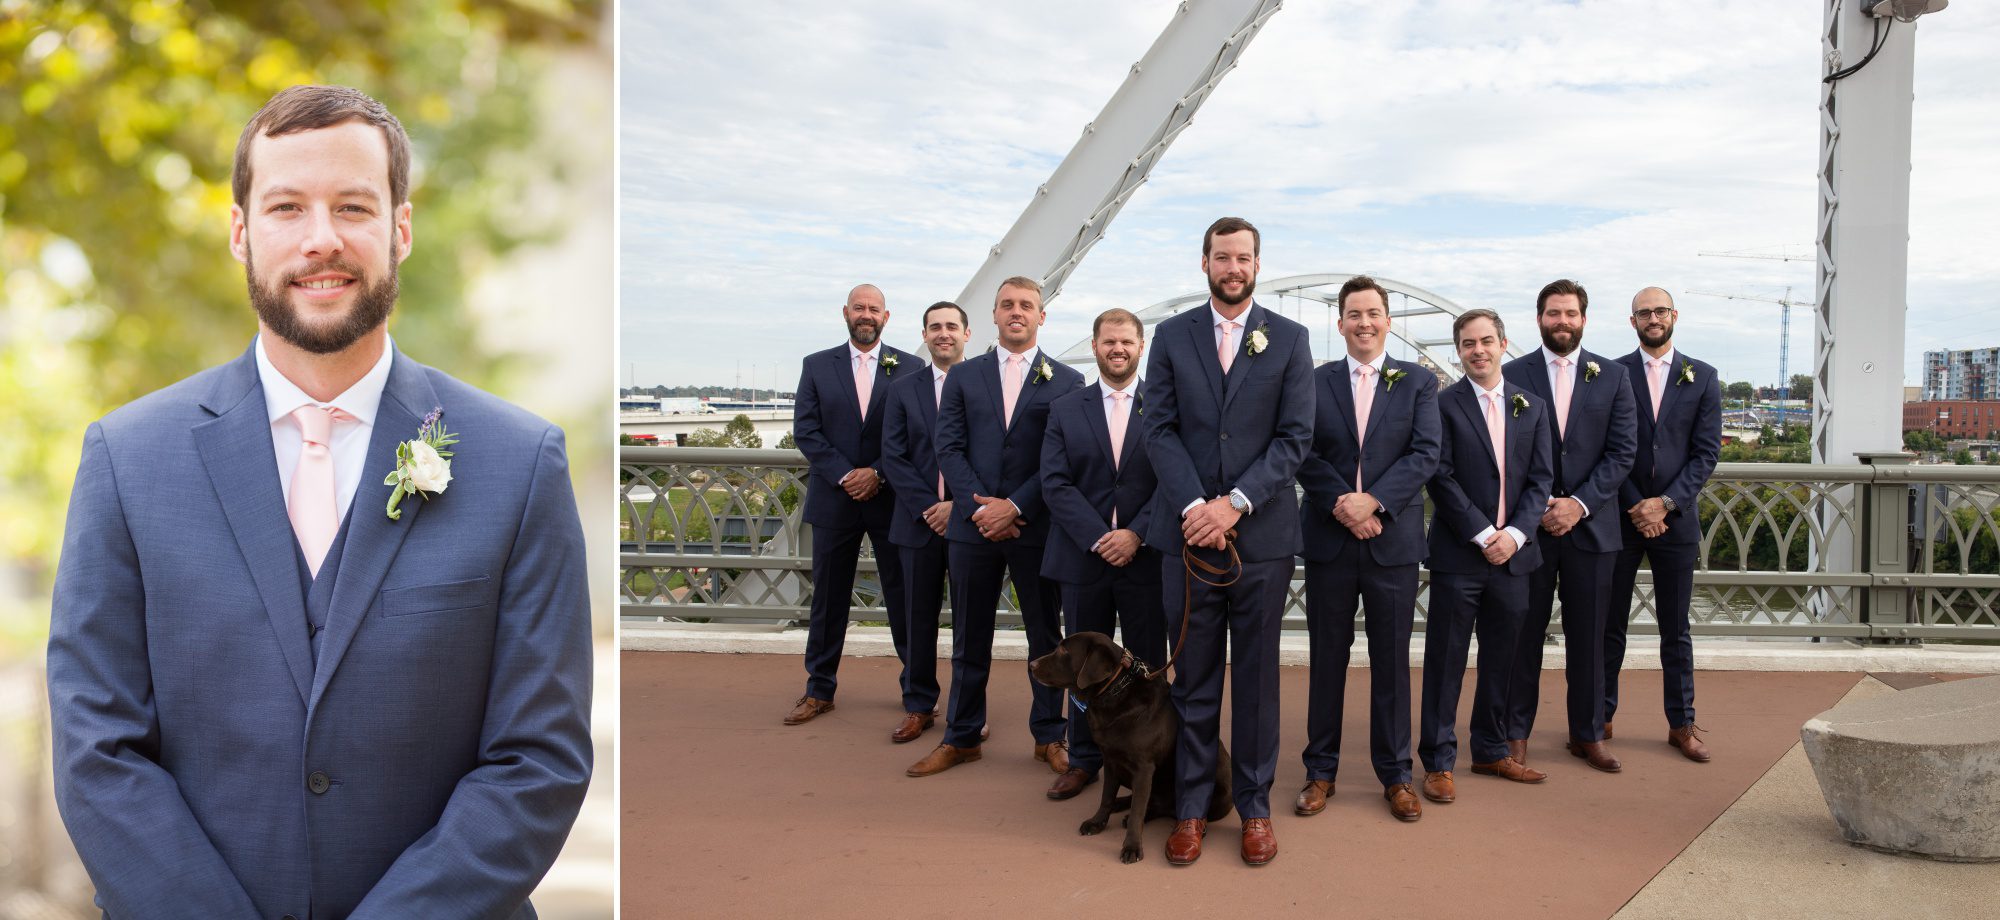 Groom and groomsmen before wedding photography at Musicians Hall of Fame in Nashville TN photos by Krista Lee 